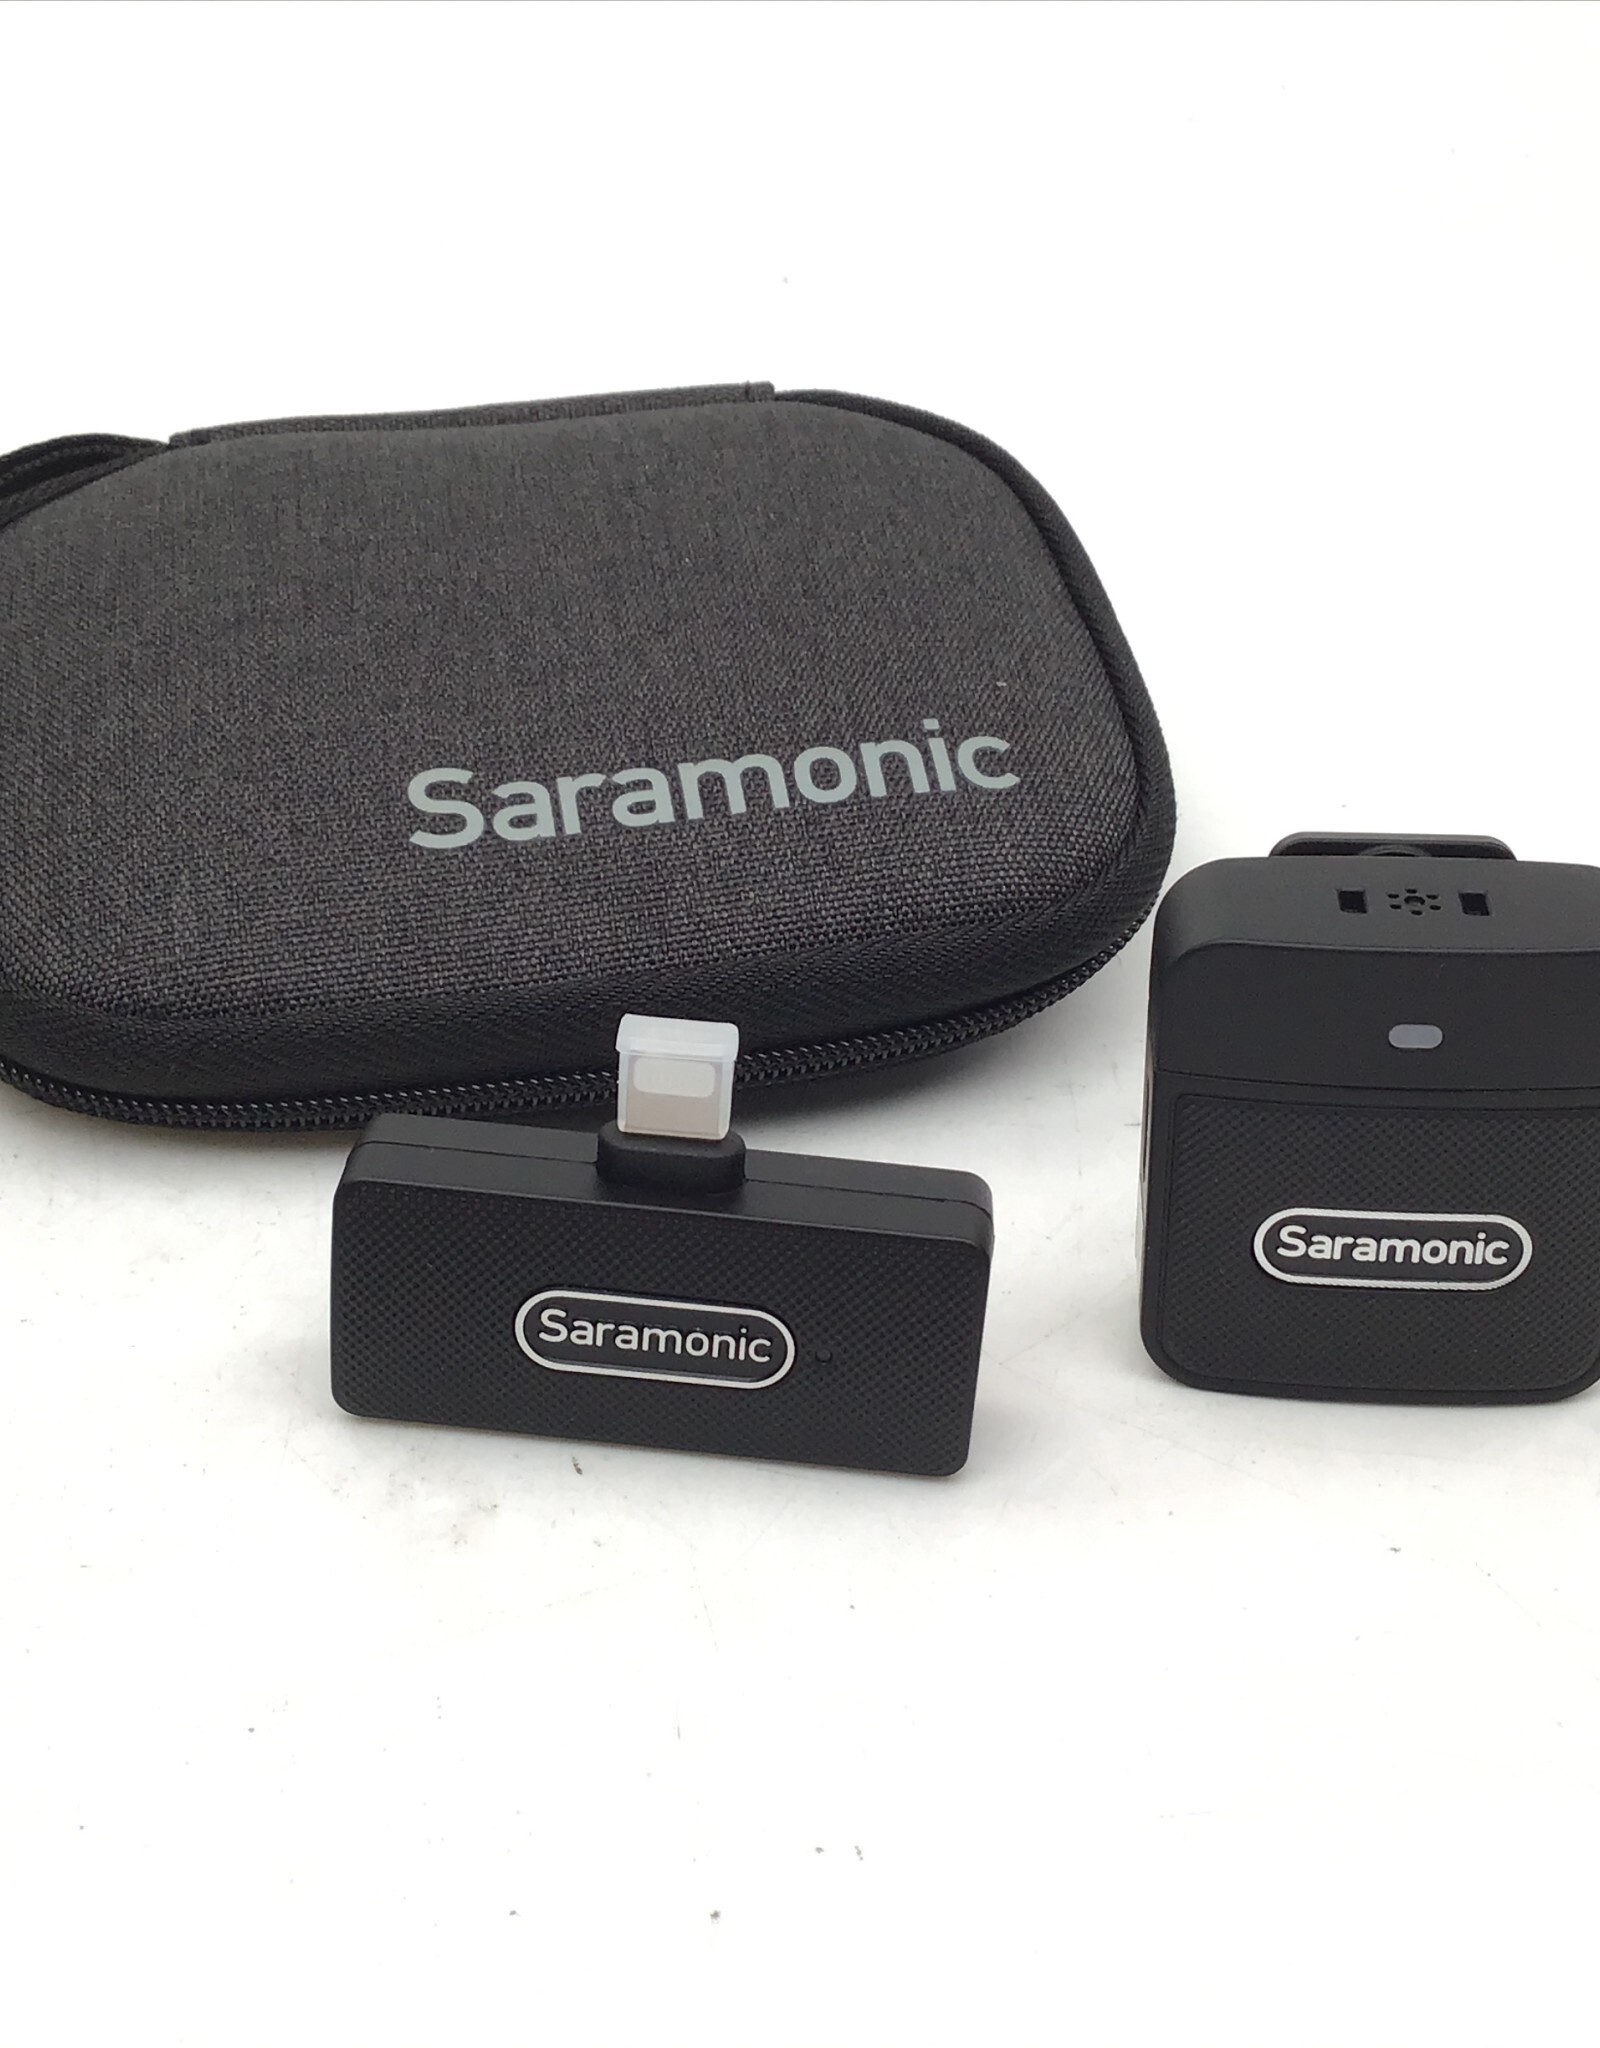 Saramonic Blink 100 B3 TX+RX  Clip On Wireless Microphone for Apple Used Good